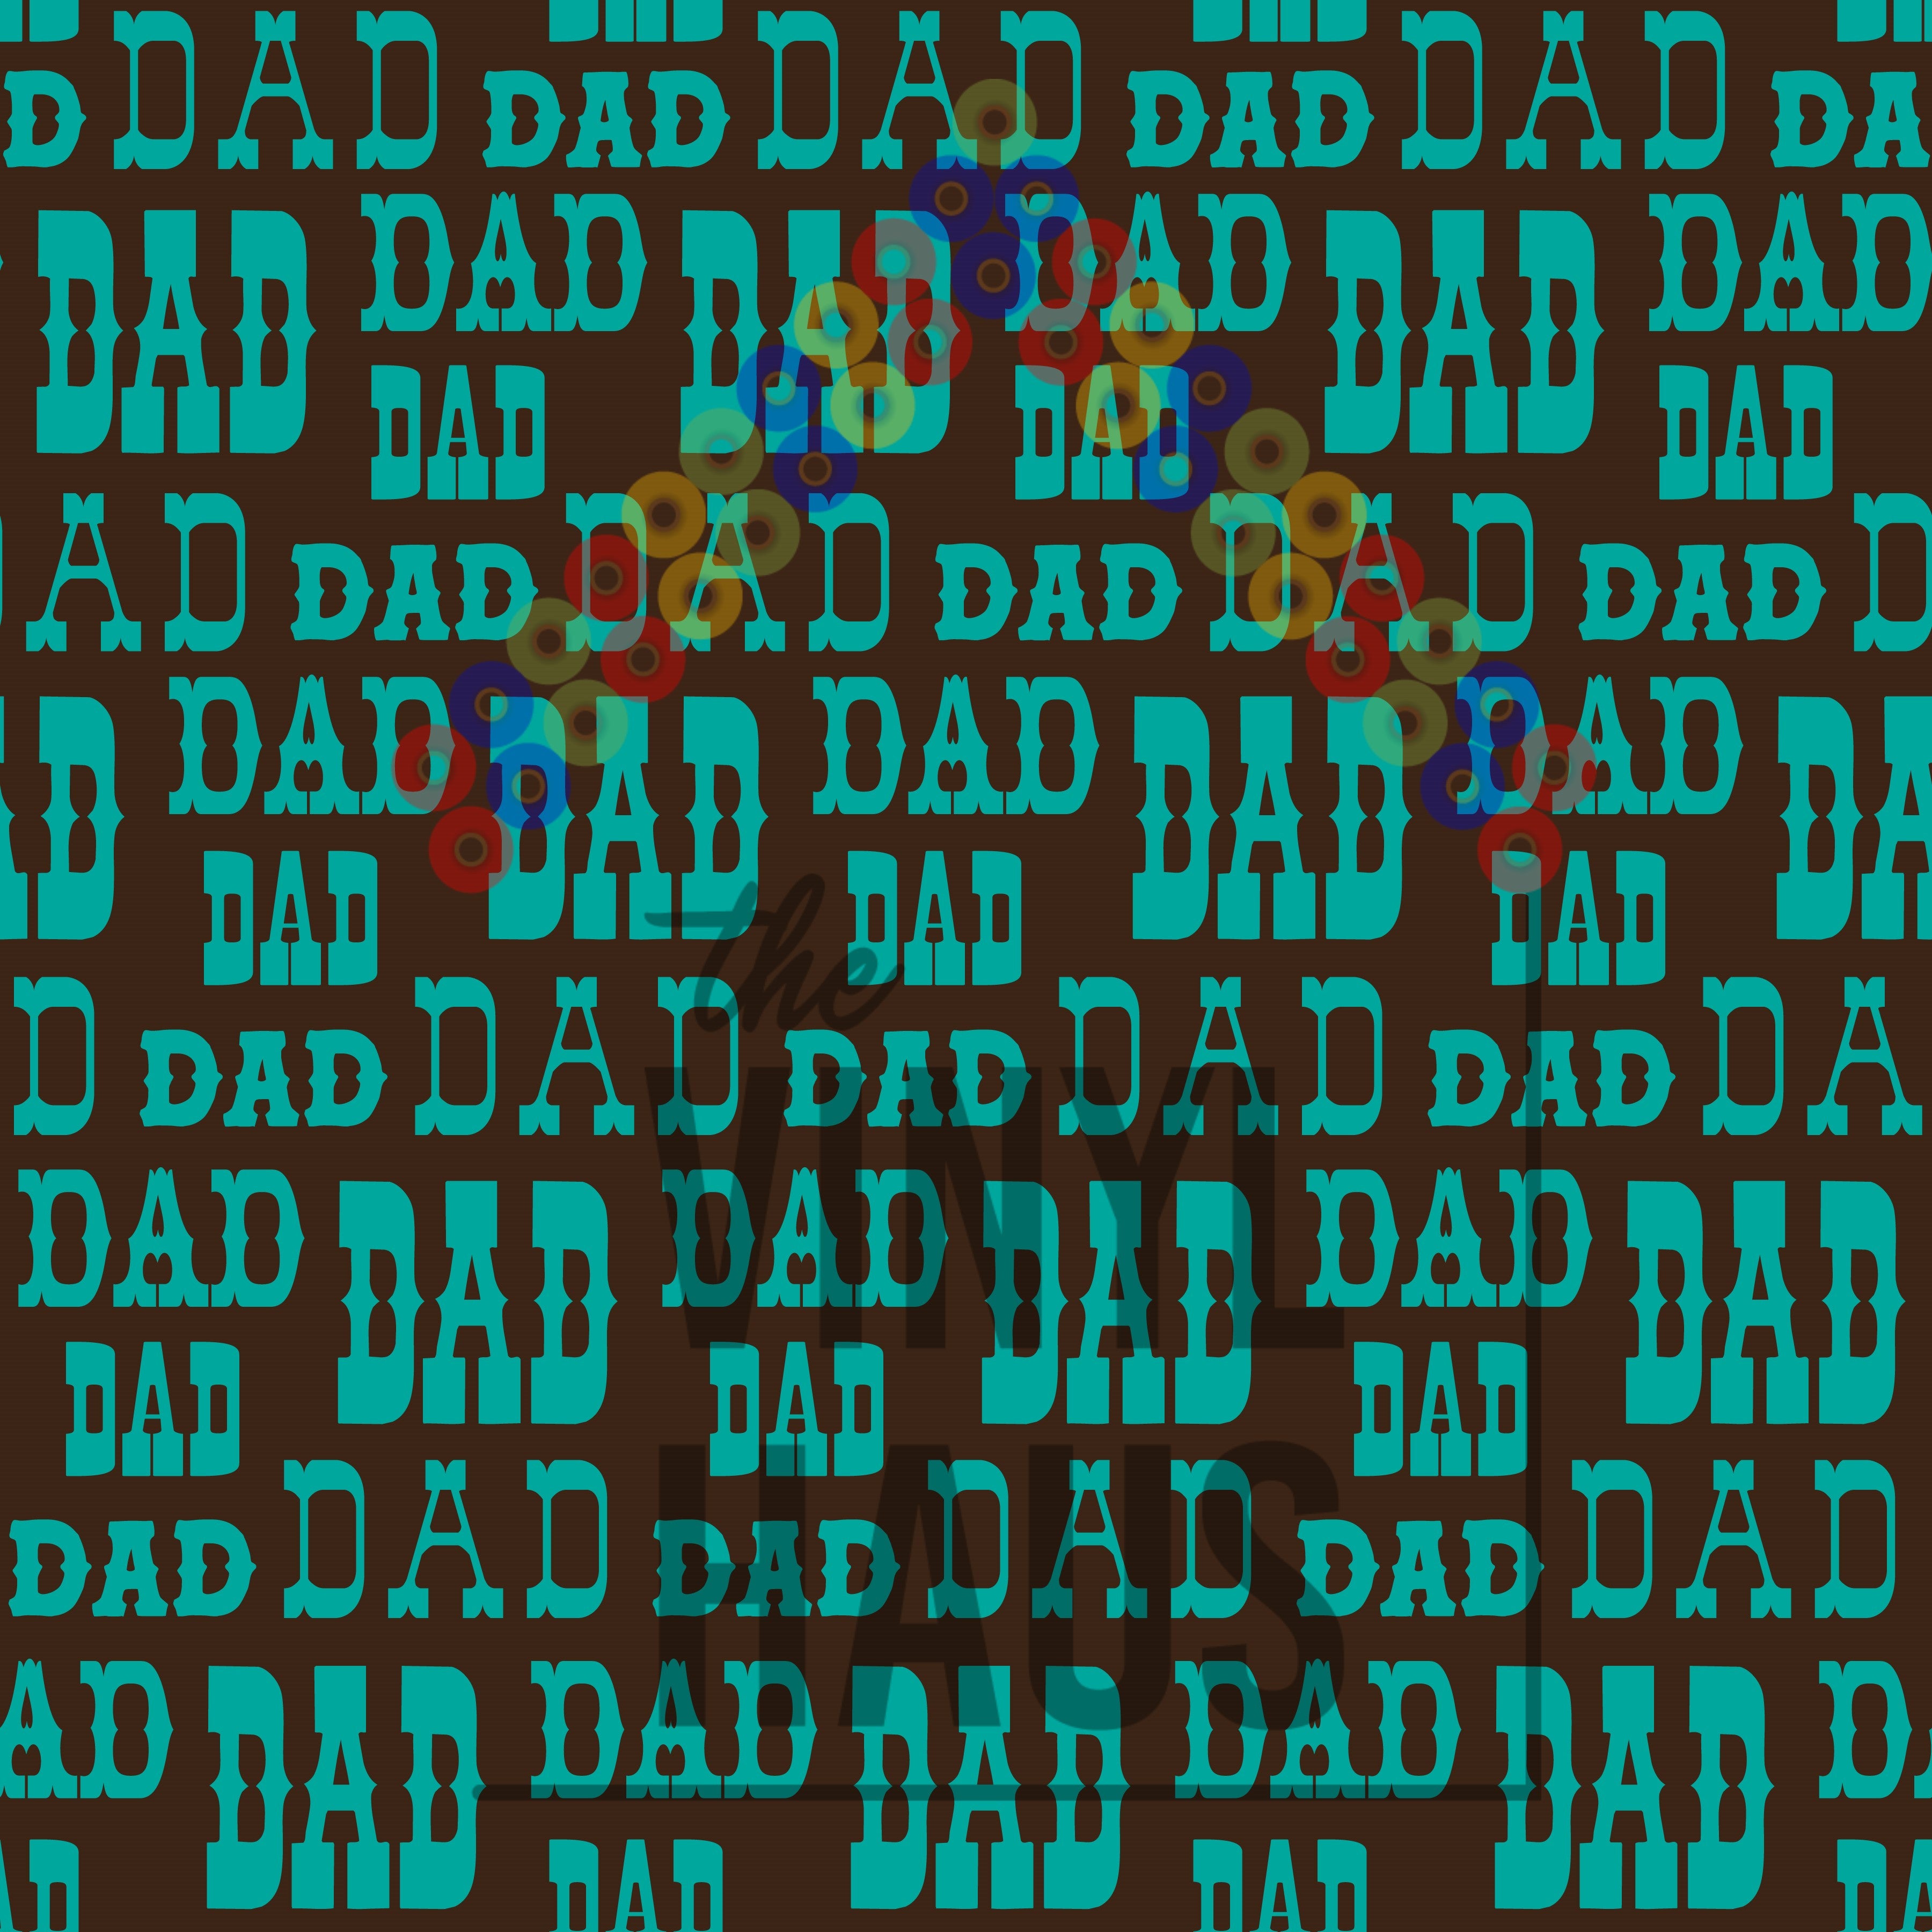 Father's Day Dad Word Collage Brown Background Pattern Vinyl 12" x 12" - The Vinyl Haus